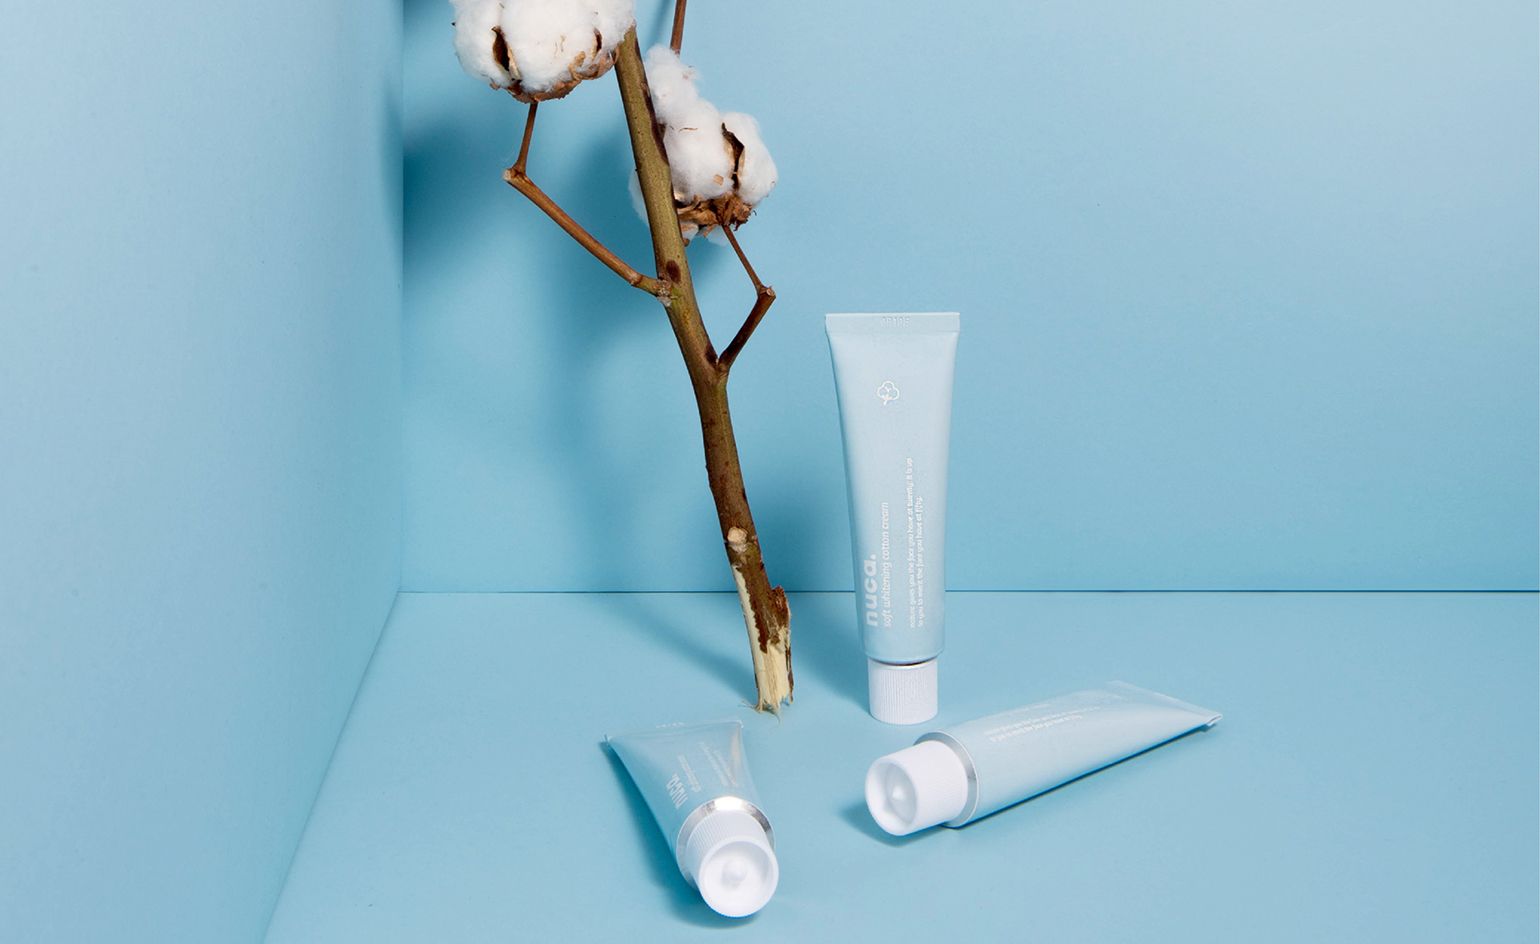 Exploring The K Beauty Trend With Nuca. Wallpaper*